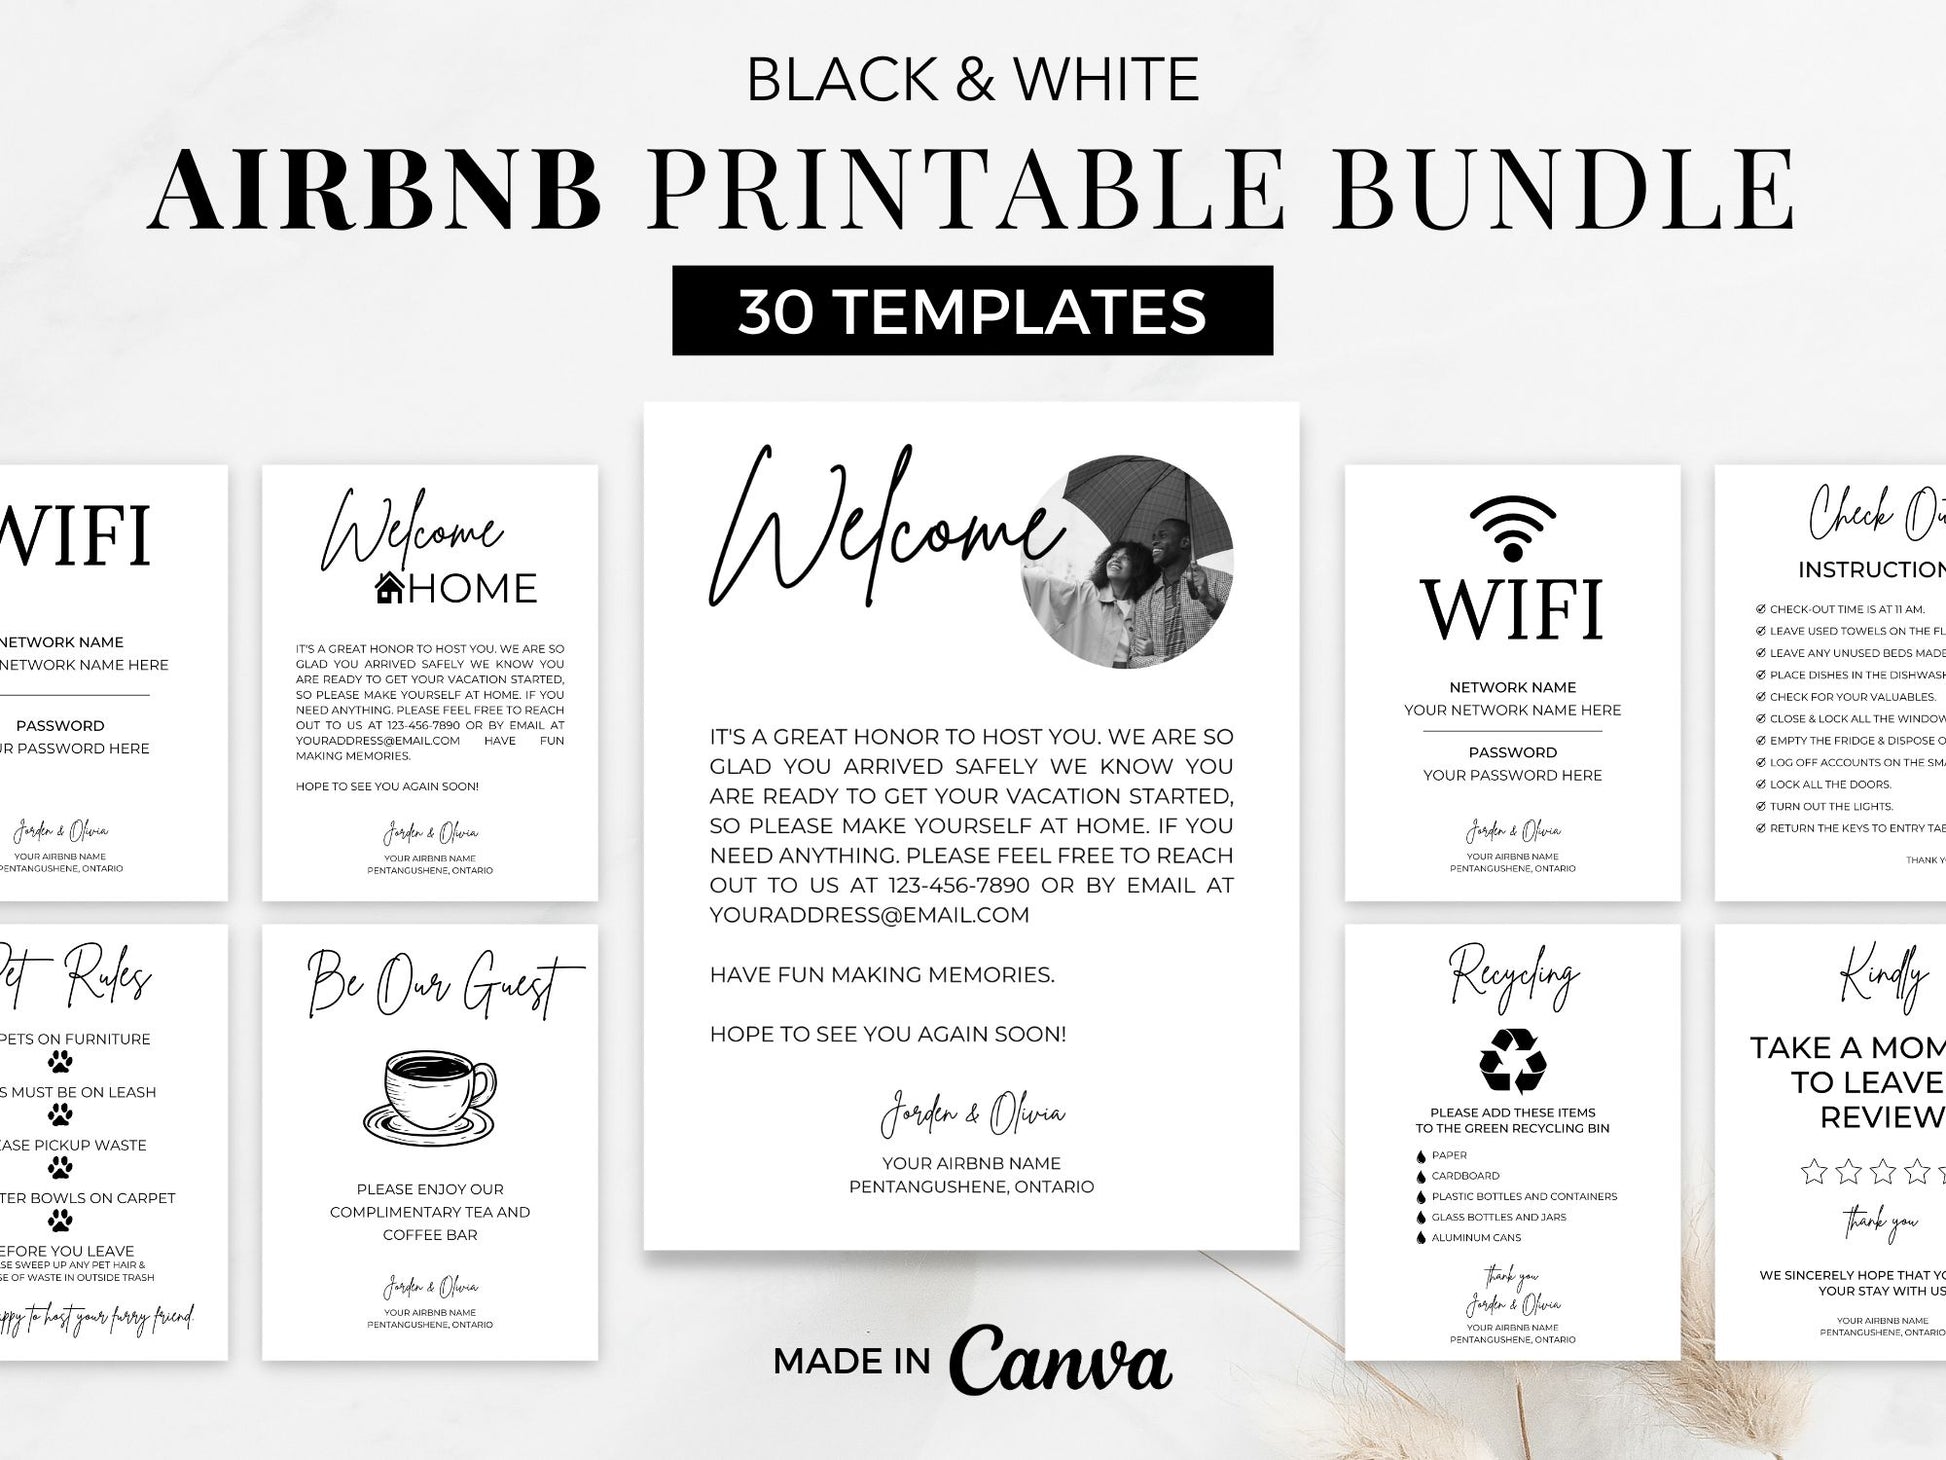 Black & White Airbnb Printable Bundle - Stylish and minimalist templates for seamless vacation rental management